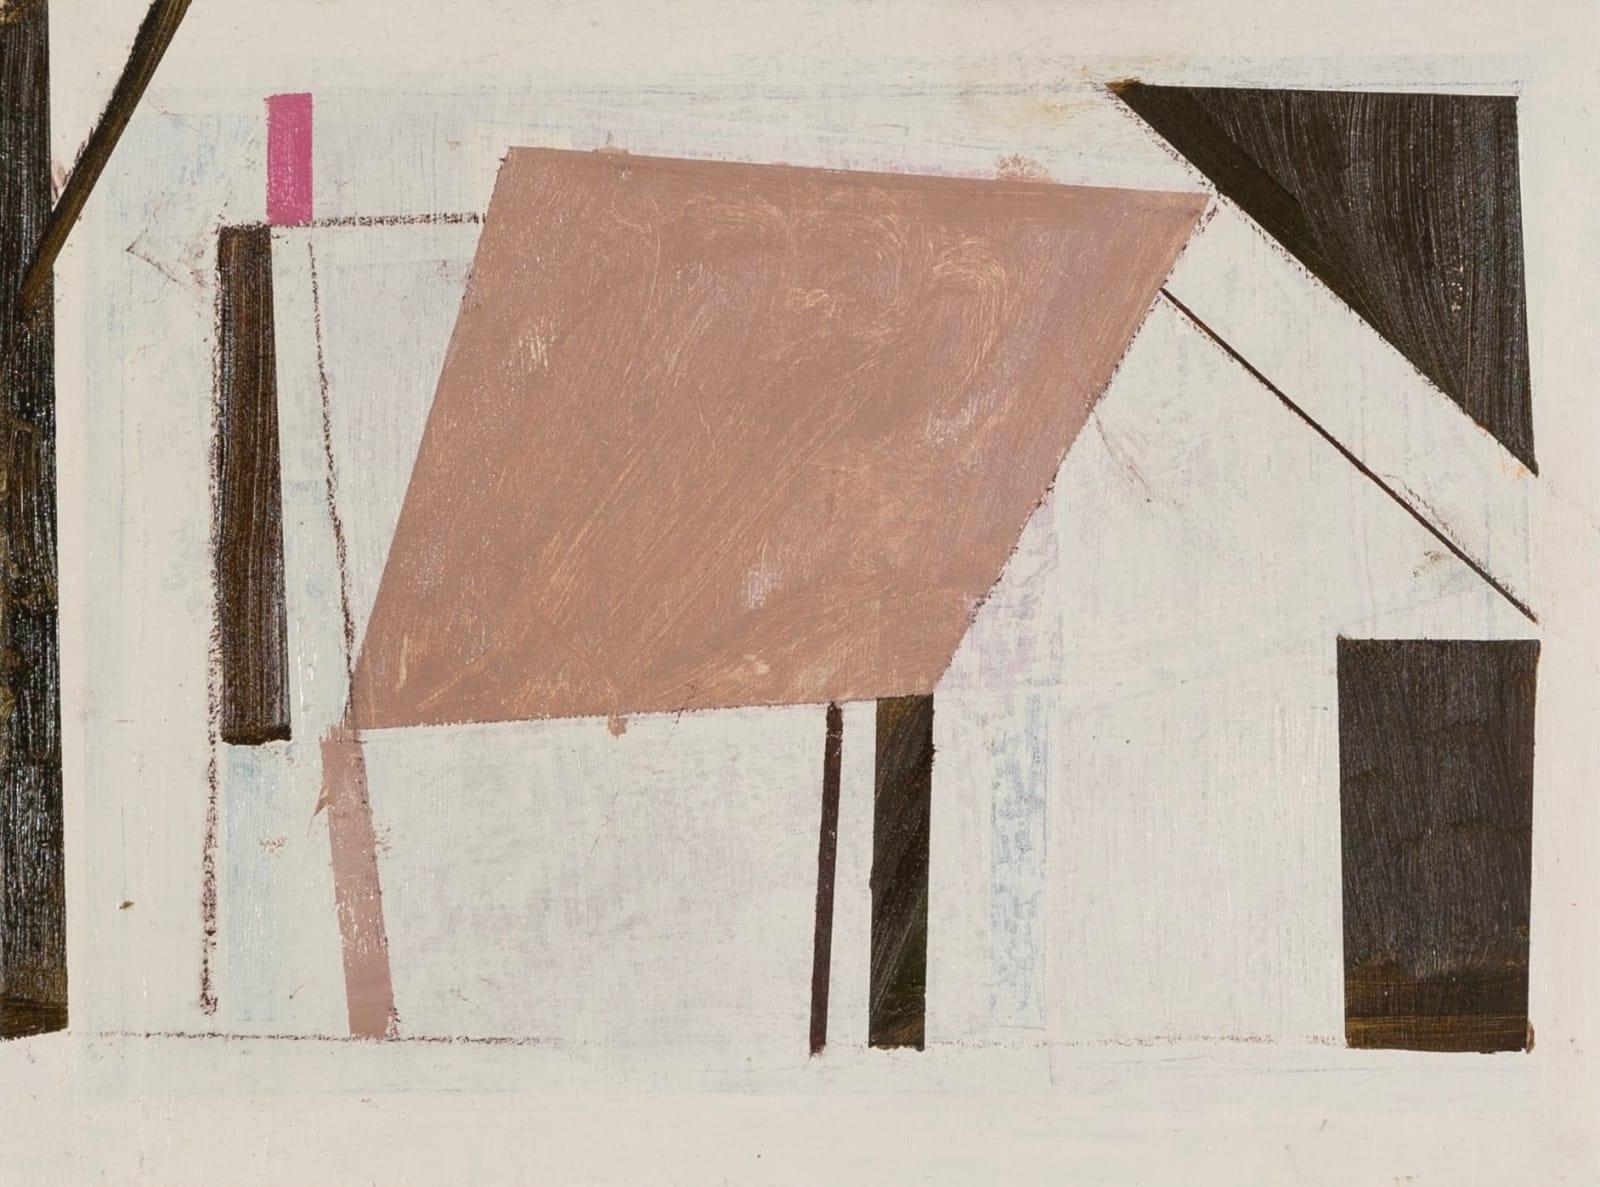 Abstract House (Pink) Painting by Daisy Cook B. 1965, 2024

Additional information:
Medium: Oil on panel
Dimensions: 18 x 24 cm
7 1/8 x 9 1/2 in

Daisy Cook is a British painter of landscape and still life.

Cook creates abstracted paintings that